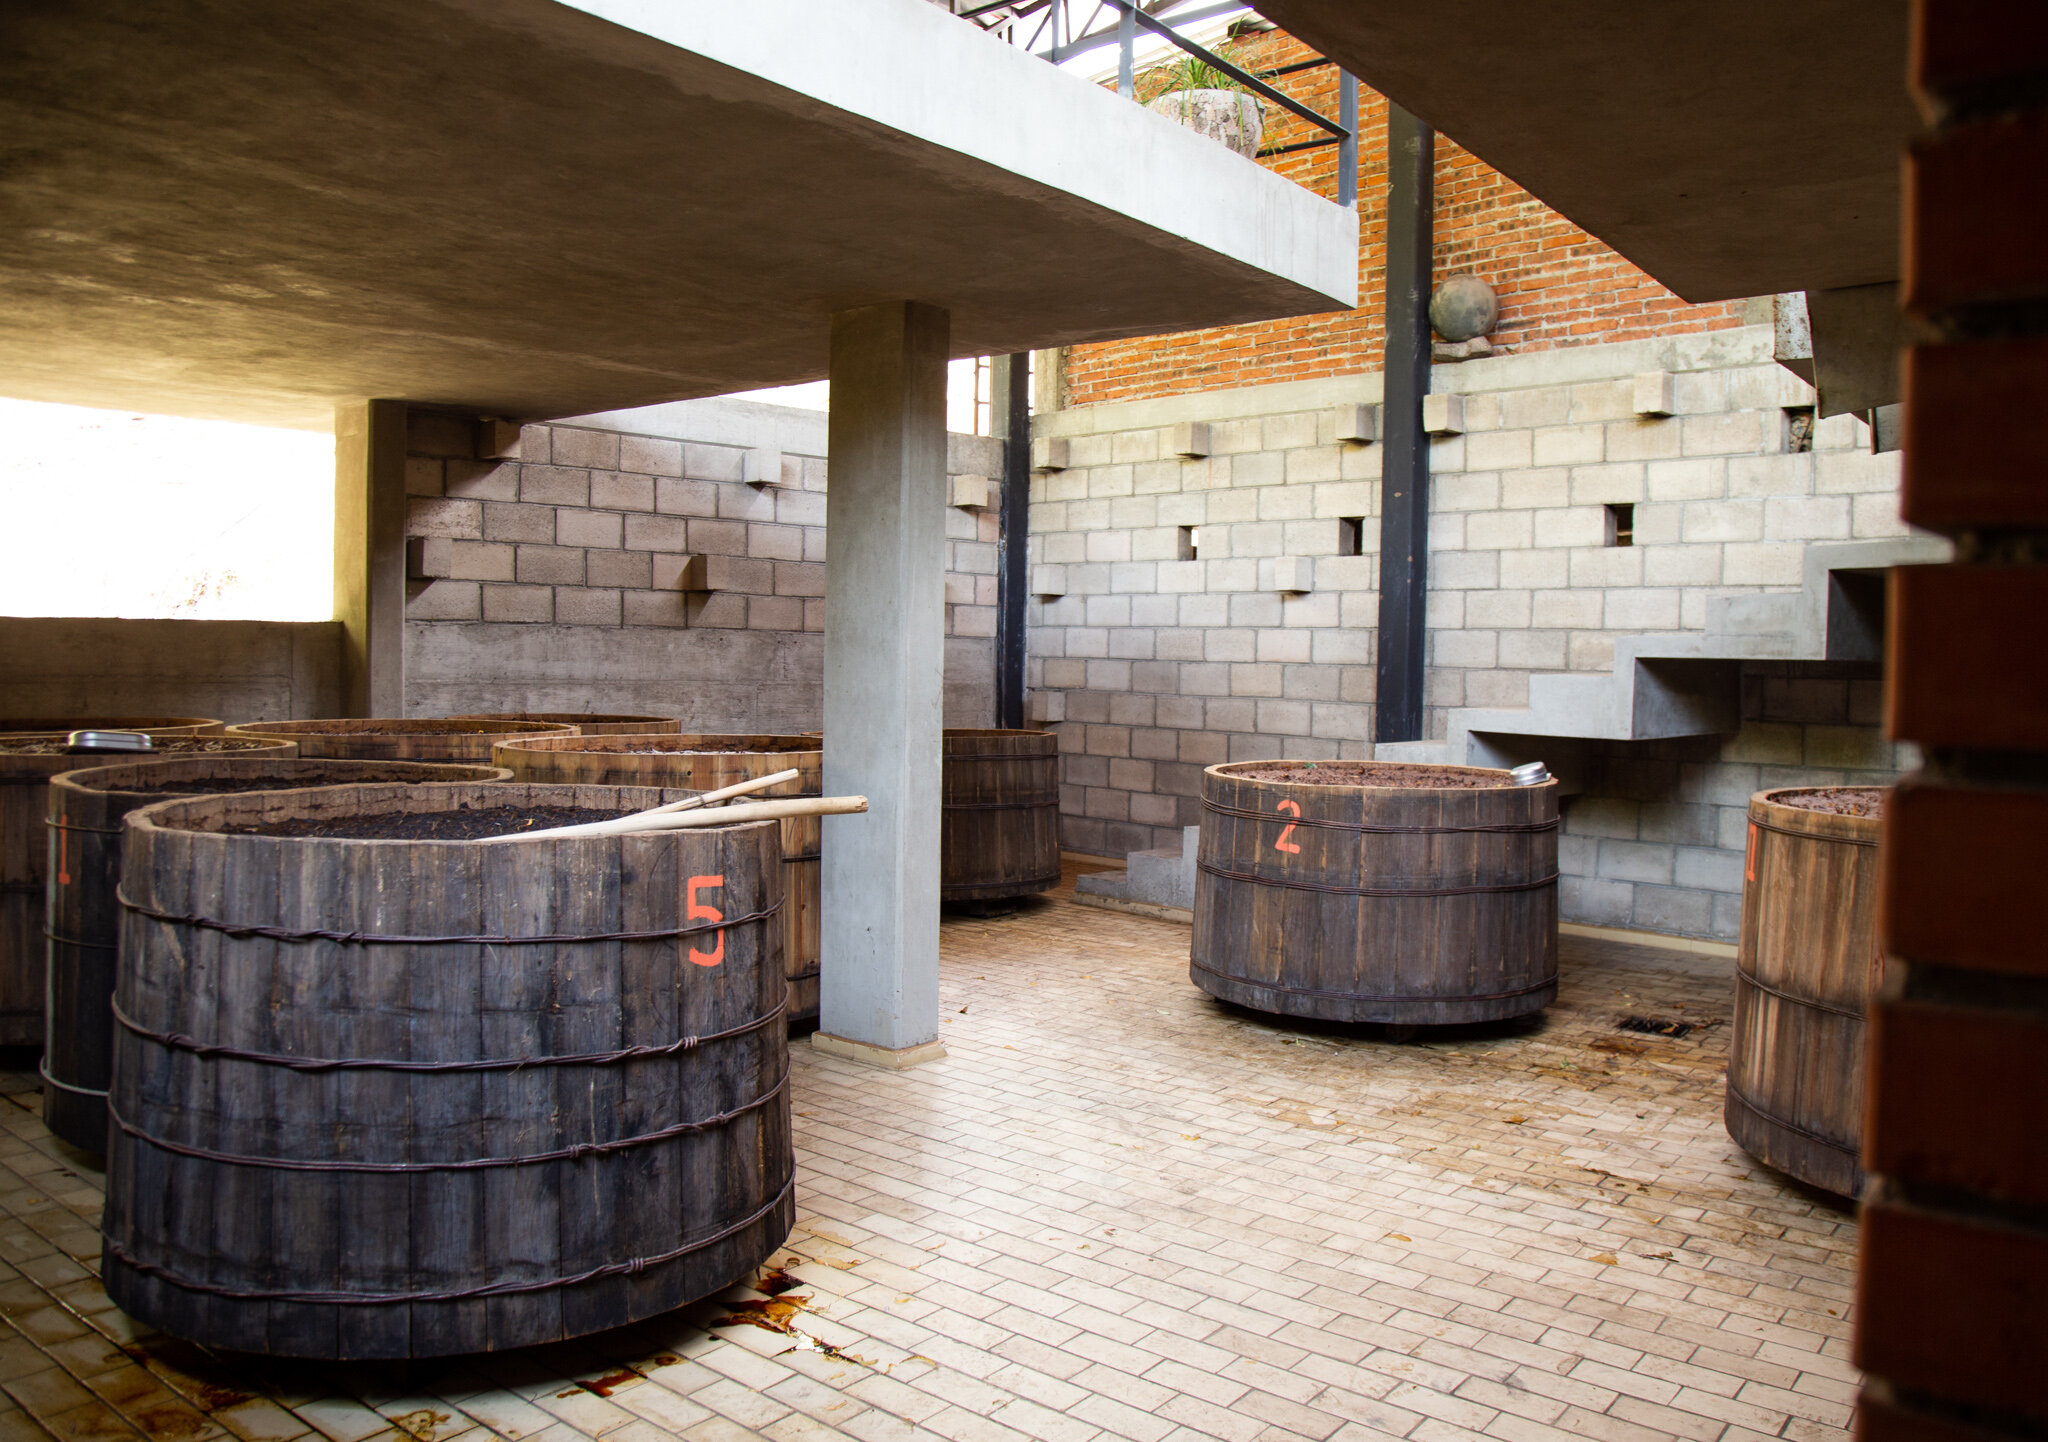 Wooden vats where the agave is stored and fermented